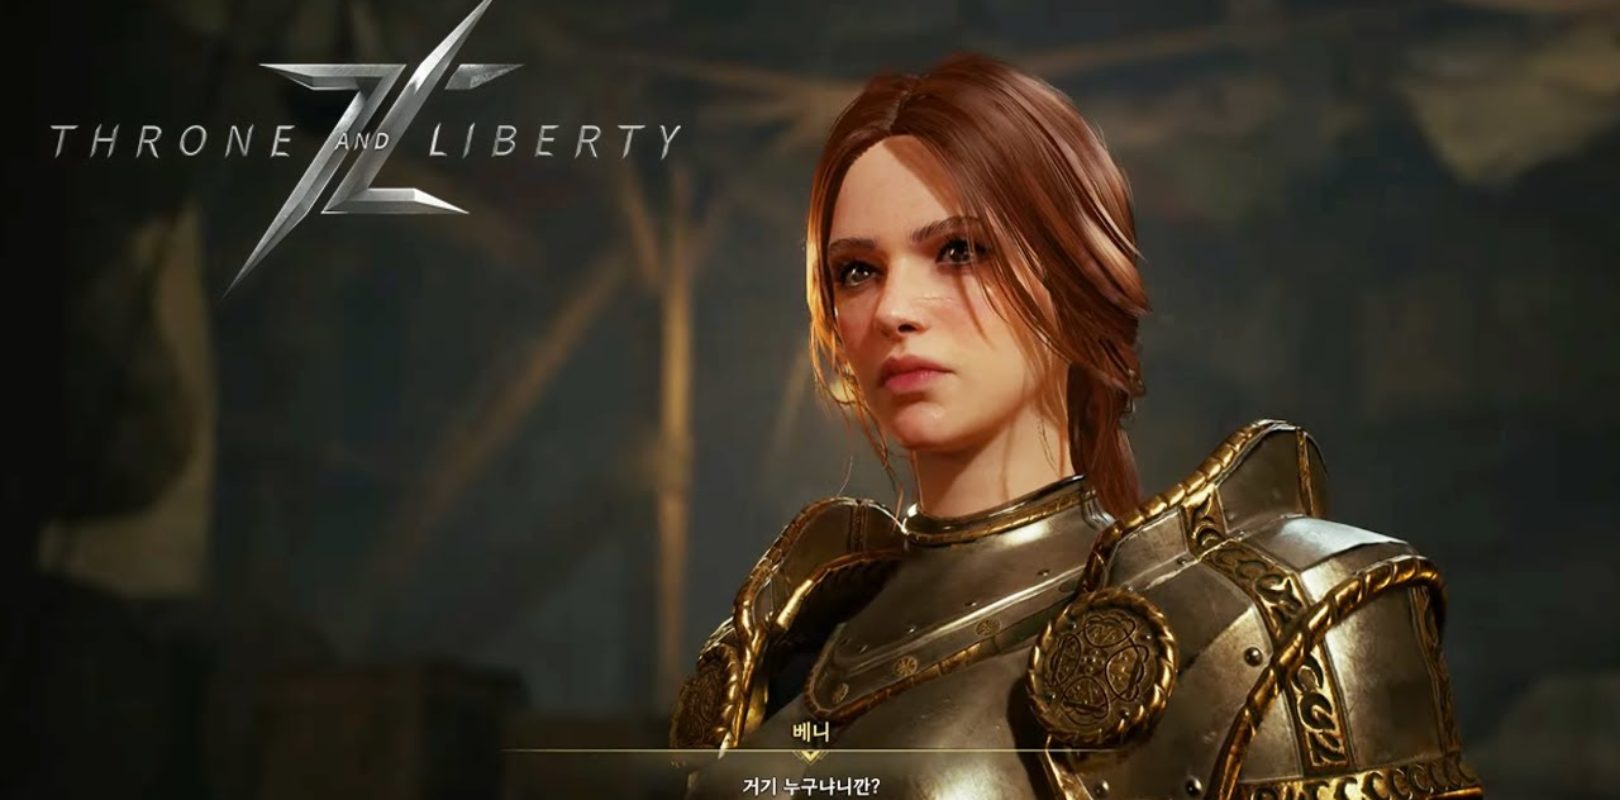 NCSOFT's Next-Generation MMORPG THRONE AND LIBERTY Latest Information  Released, Scheduled for Release in H1 2023 for PC/Consoles - Saiga NAK